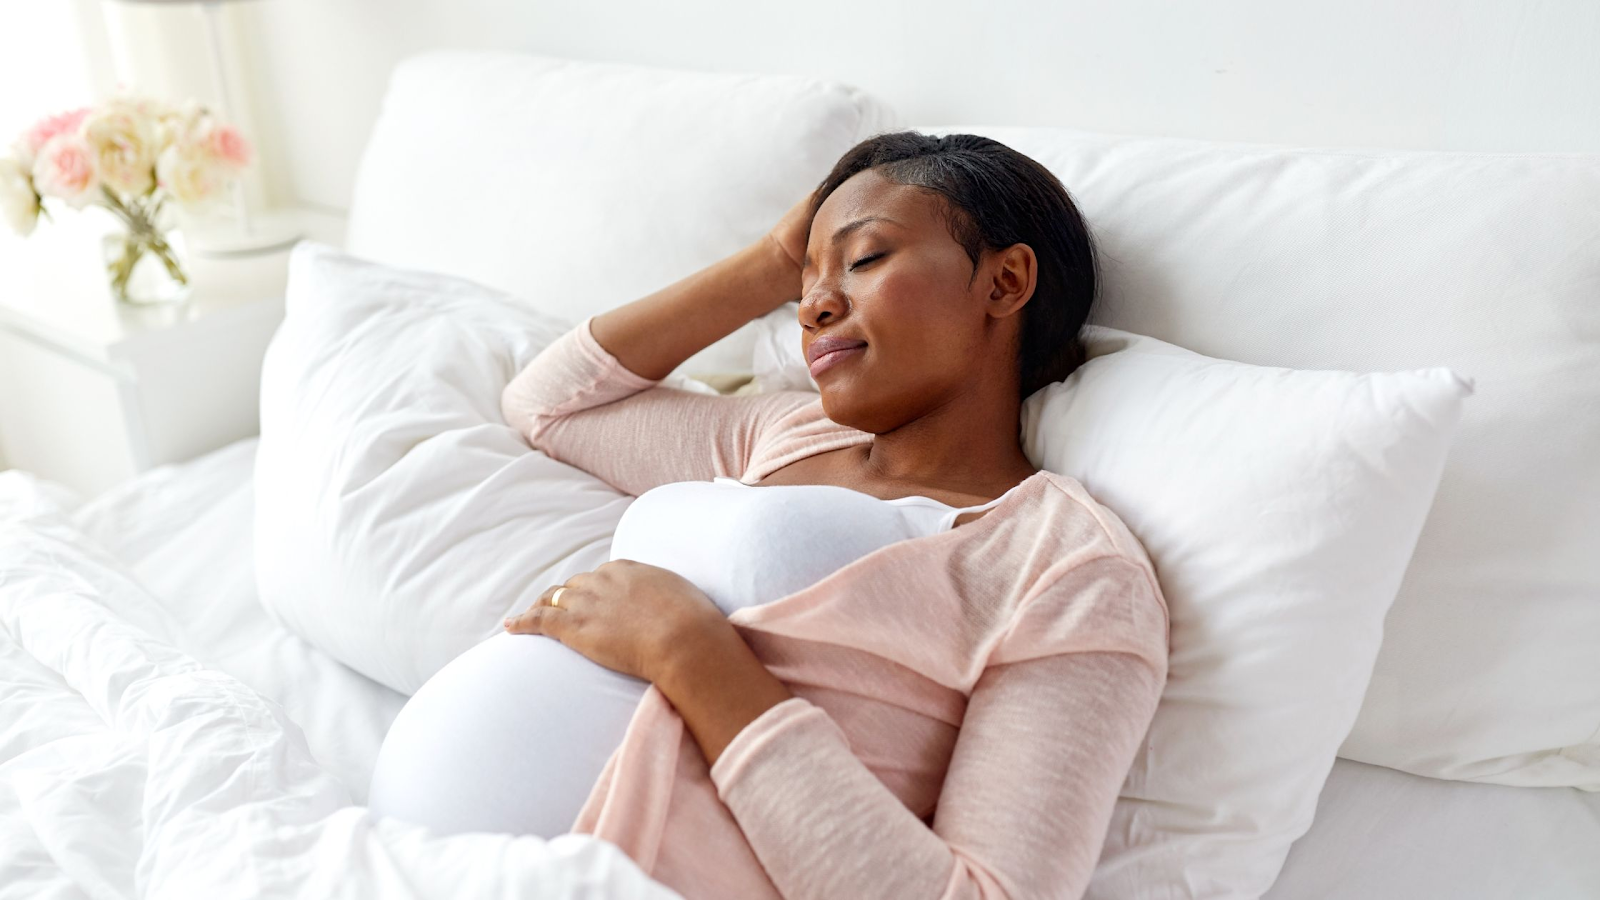 So, Why Are Pregnancy Pillows So Comfortable